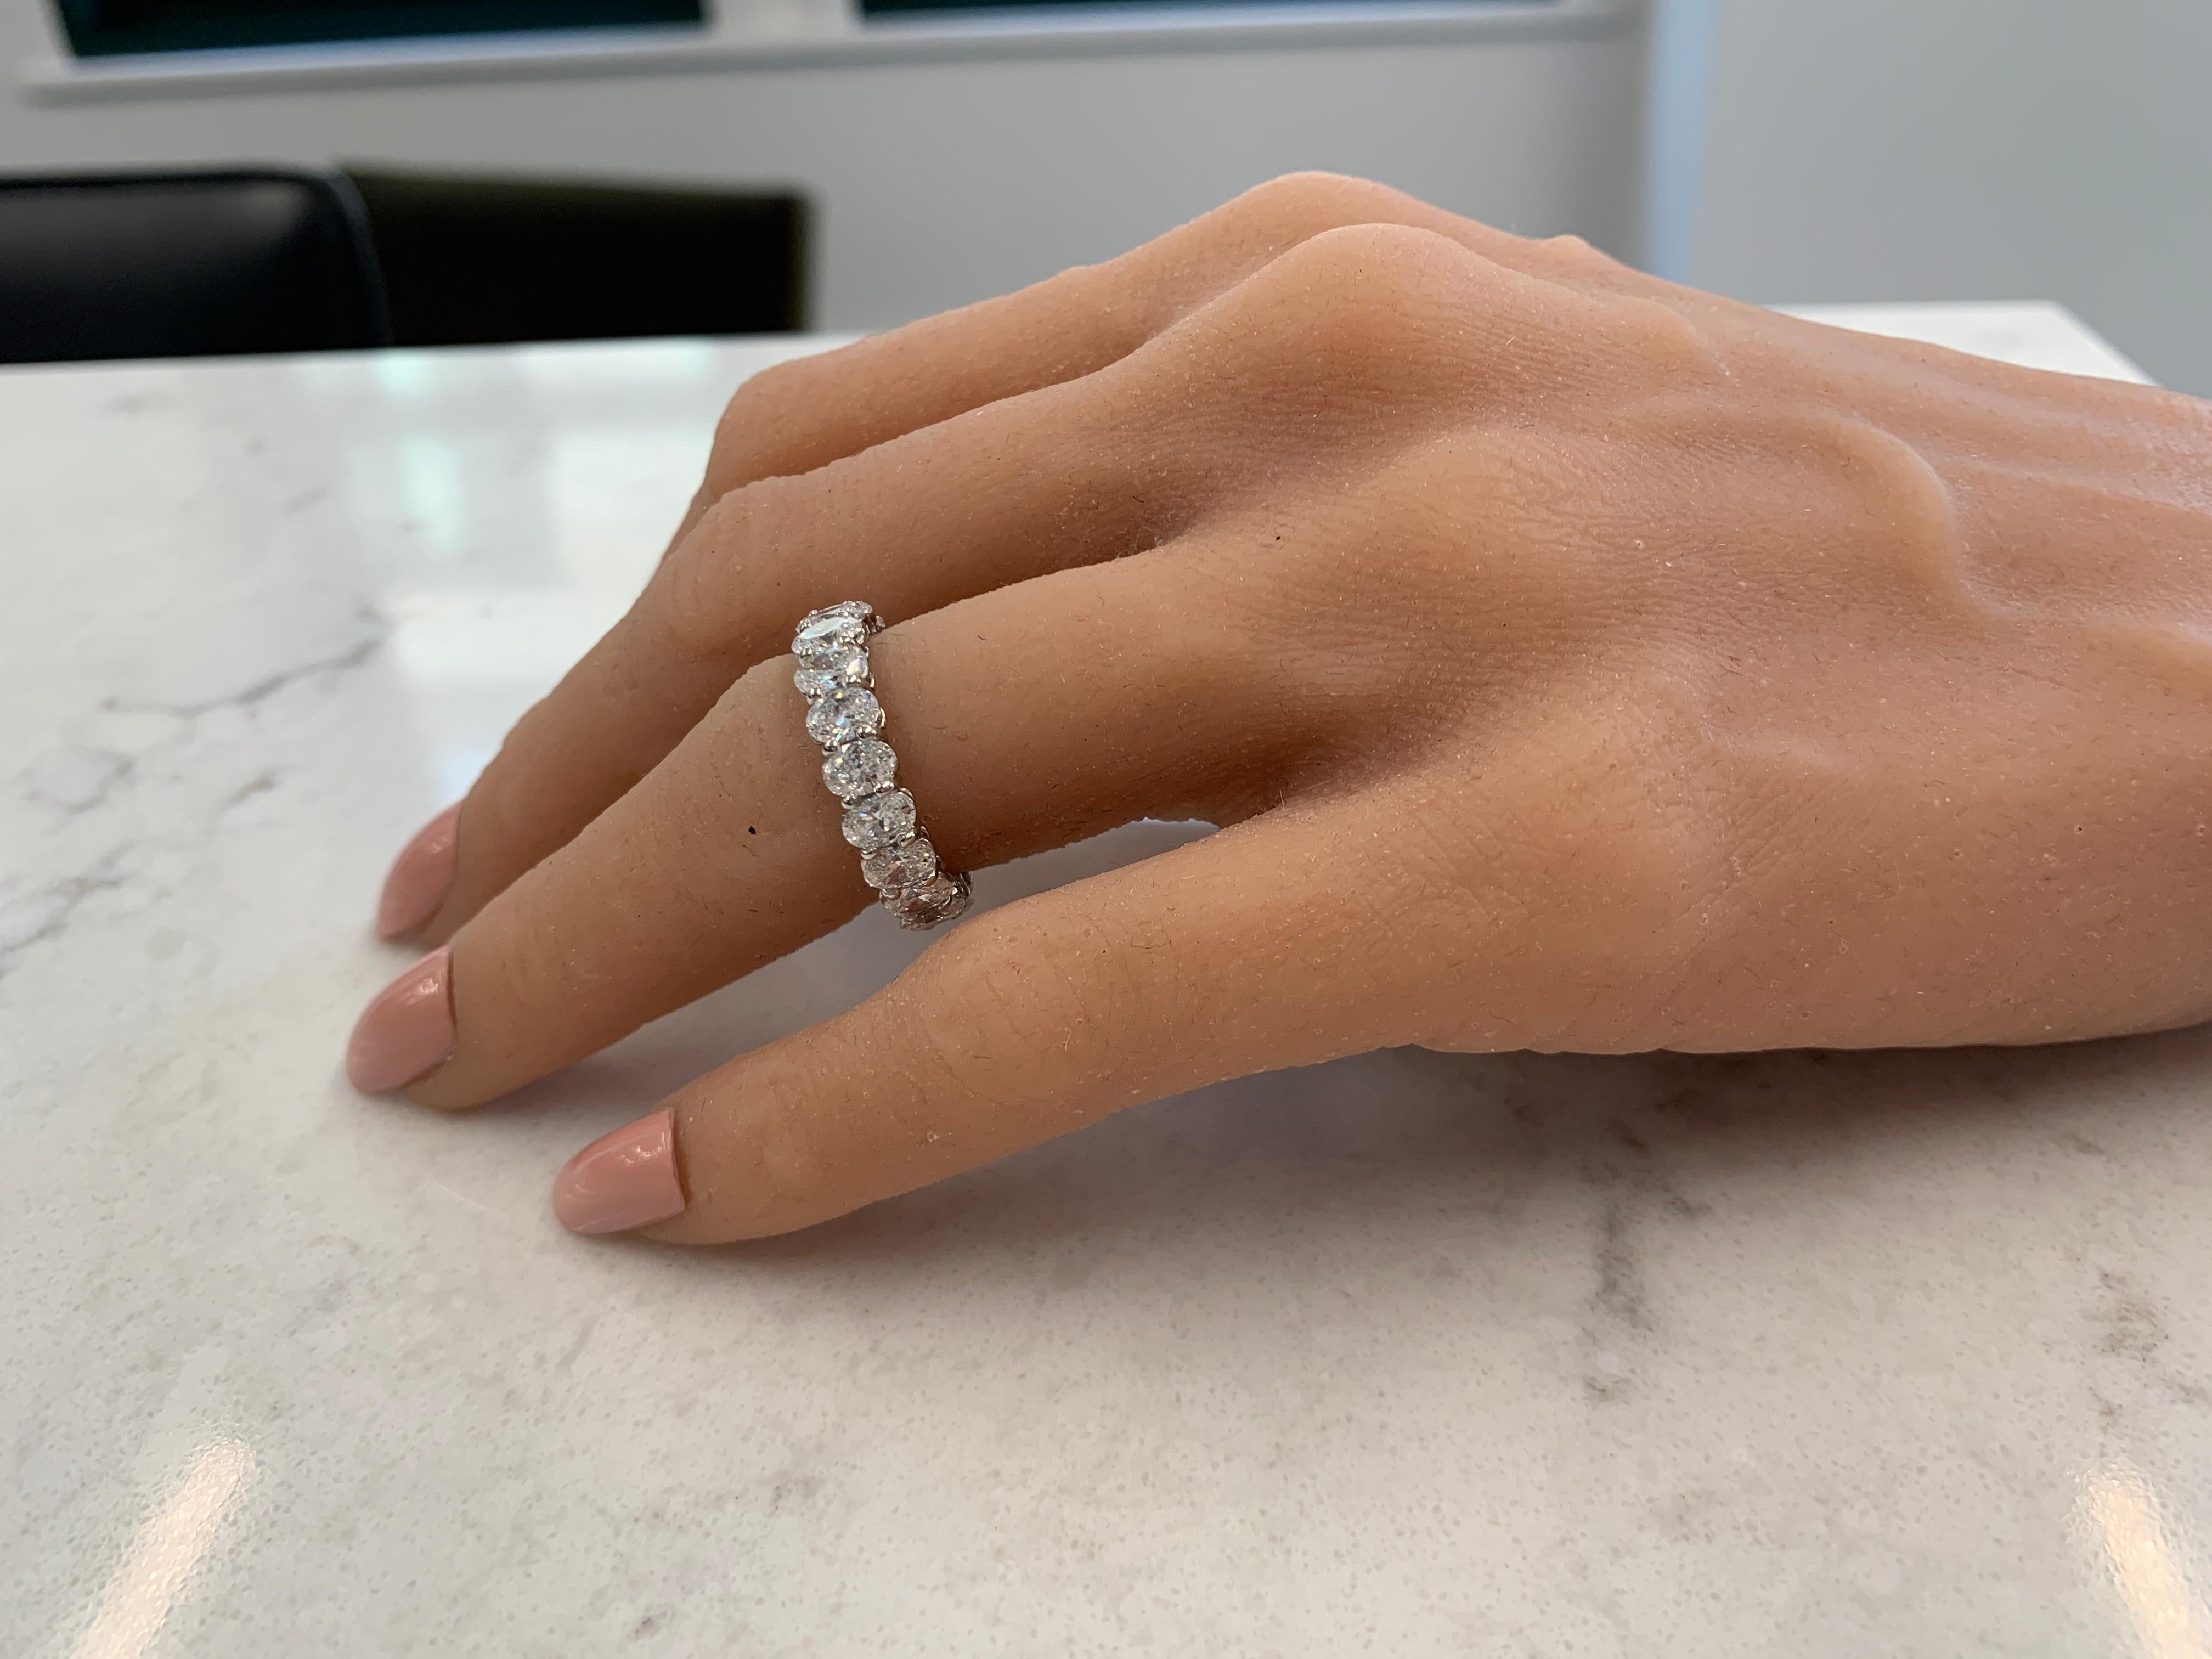 Diamond eternity bands are perfect for stacking with other fine rings or worn as a classic style wedding band, displaying spectacular fire and brilliance in a never-ending row. This gorgeous 18k white gold eternity band features a total of 19 oval